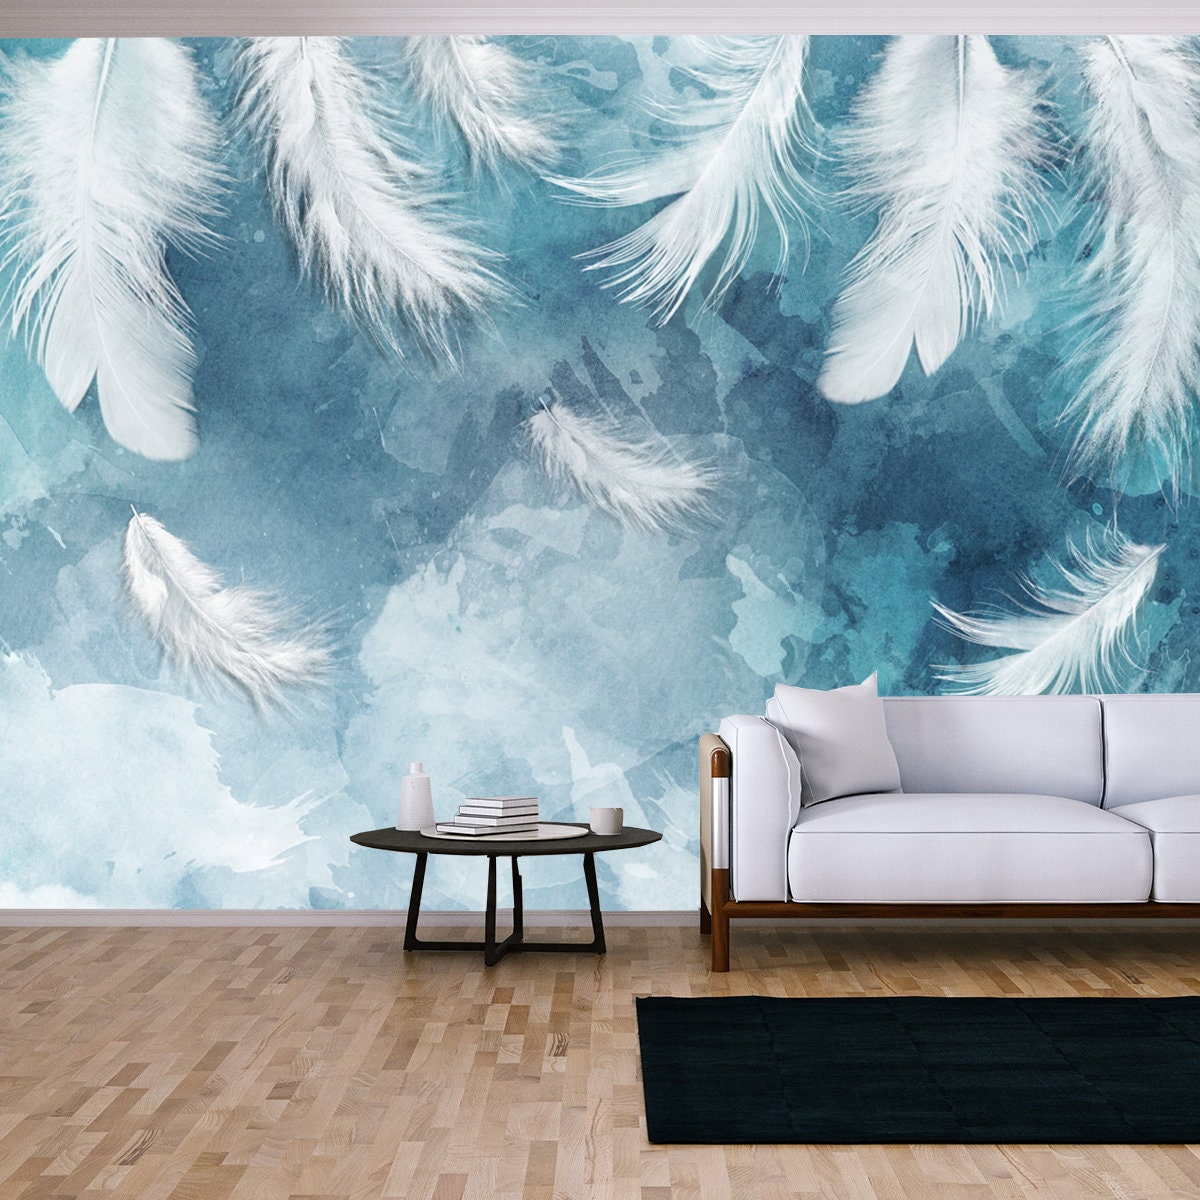 3d Picture of White Feathers on a Blue Background Wallpaper Living Room Mural